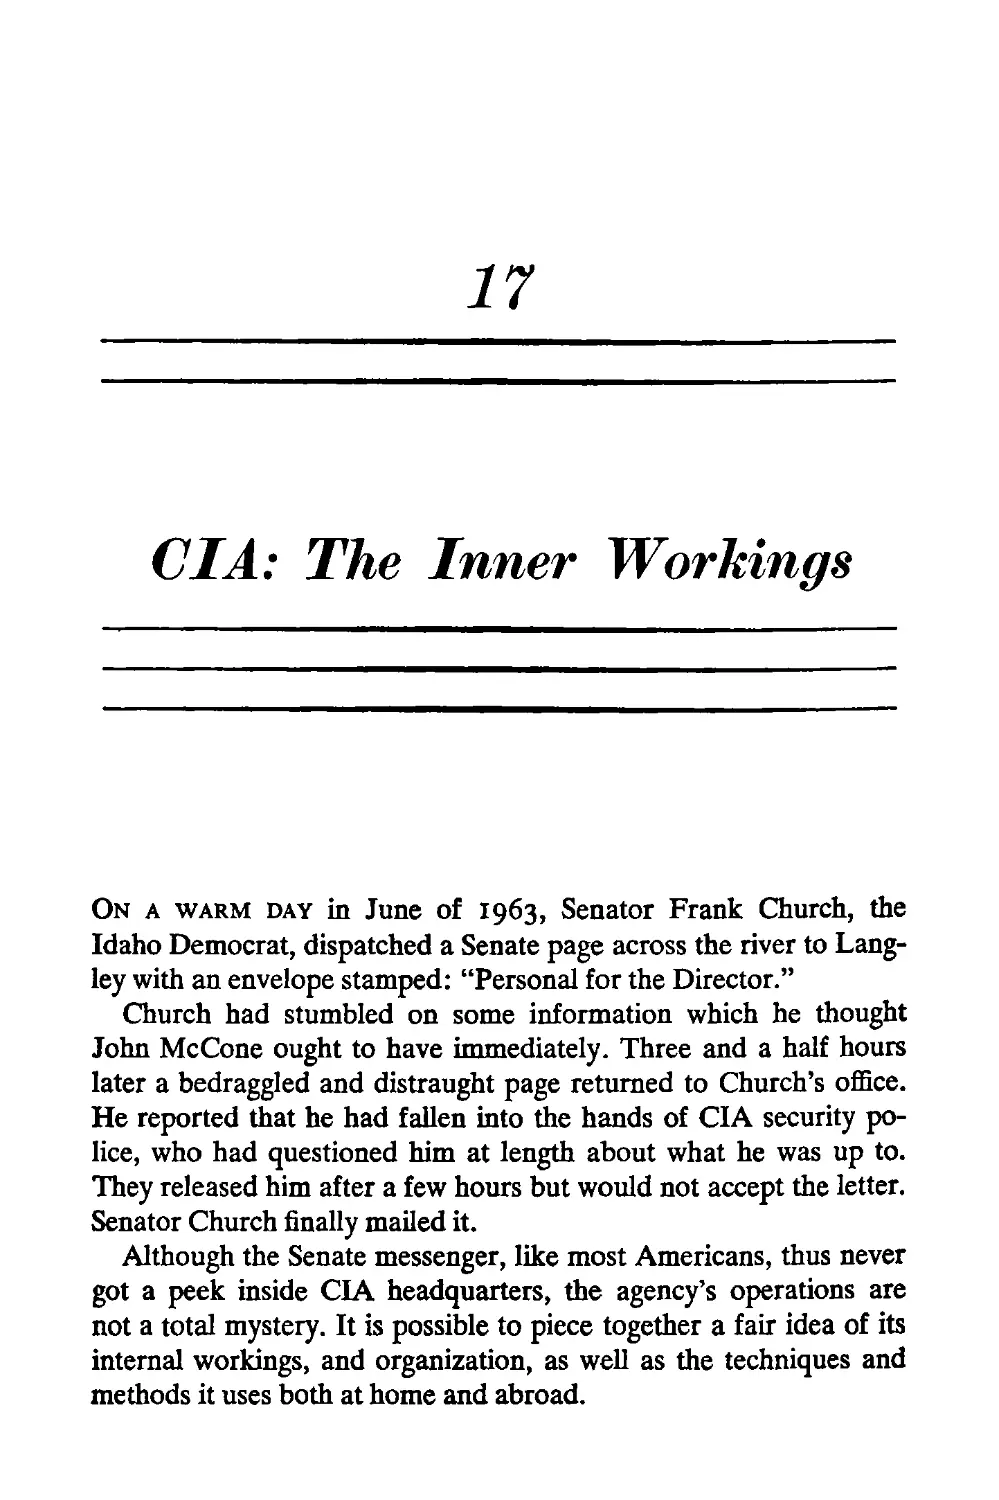 17. CIA: The Inner Workings